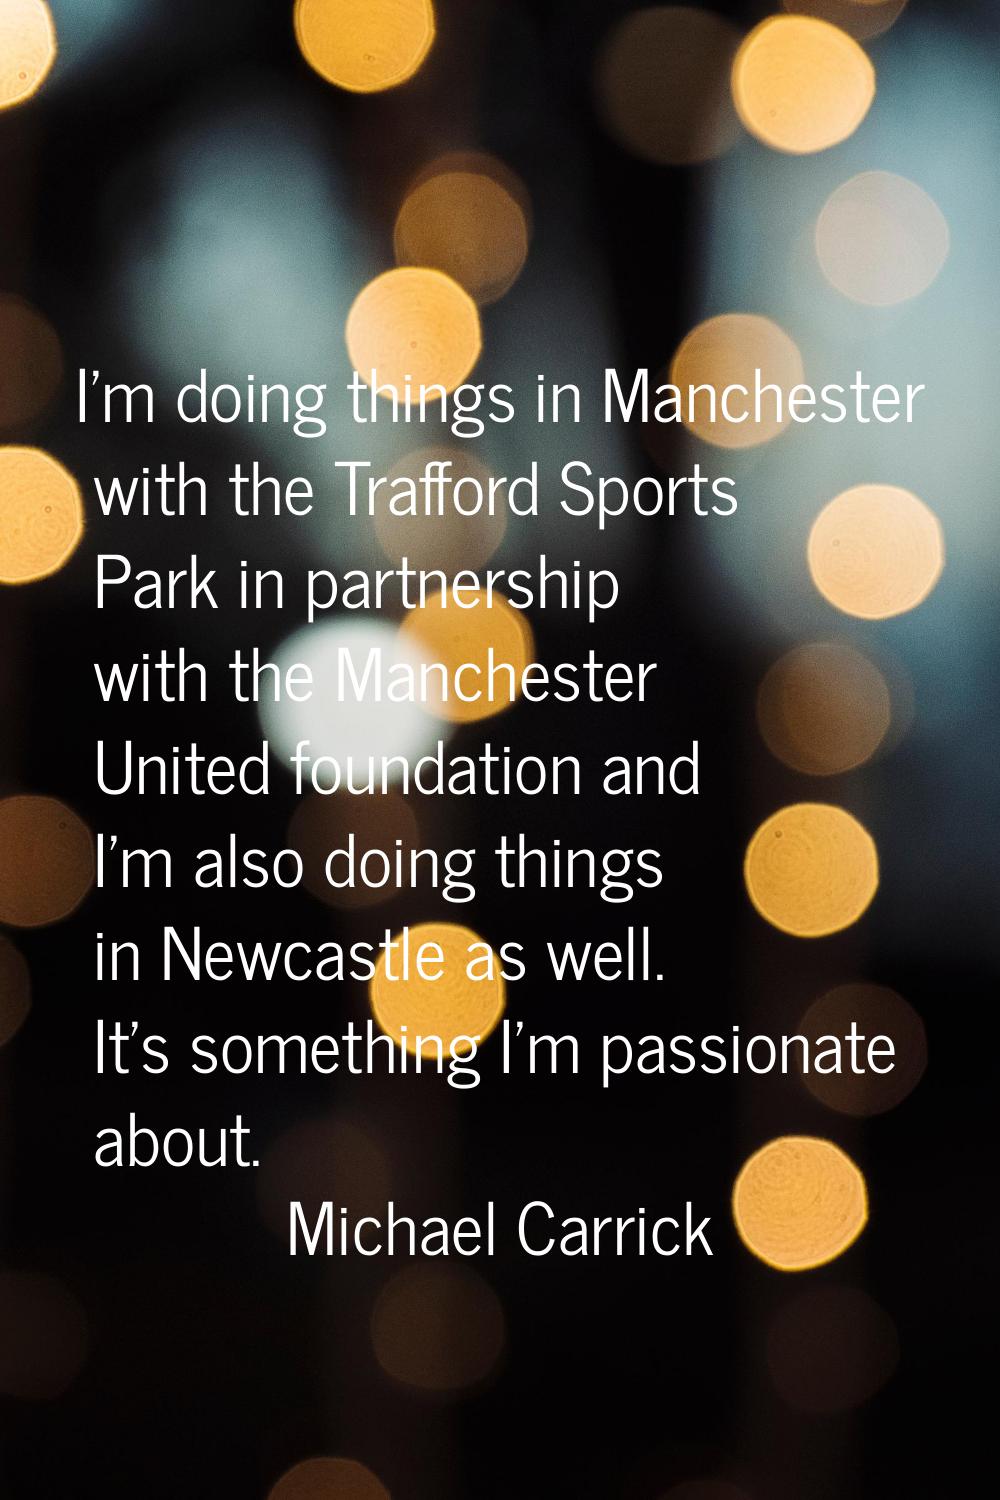 I'm doing things in Manchester with the Trafford Sports Park in partnership with the Manchester Uni